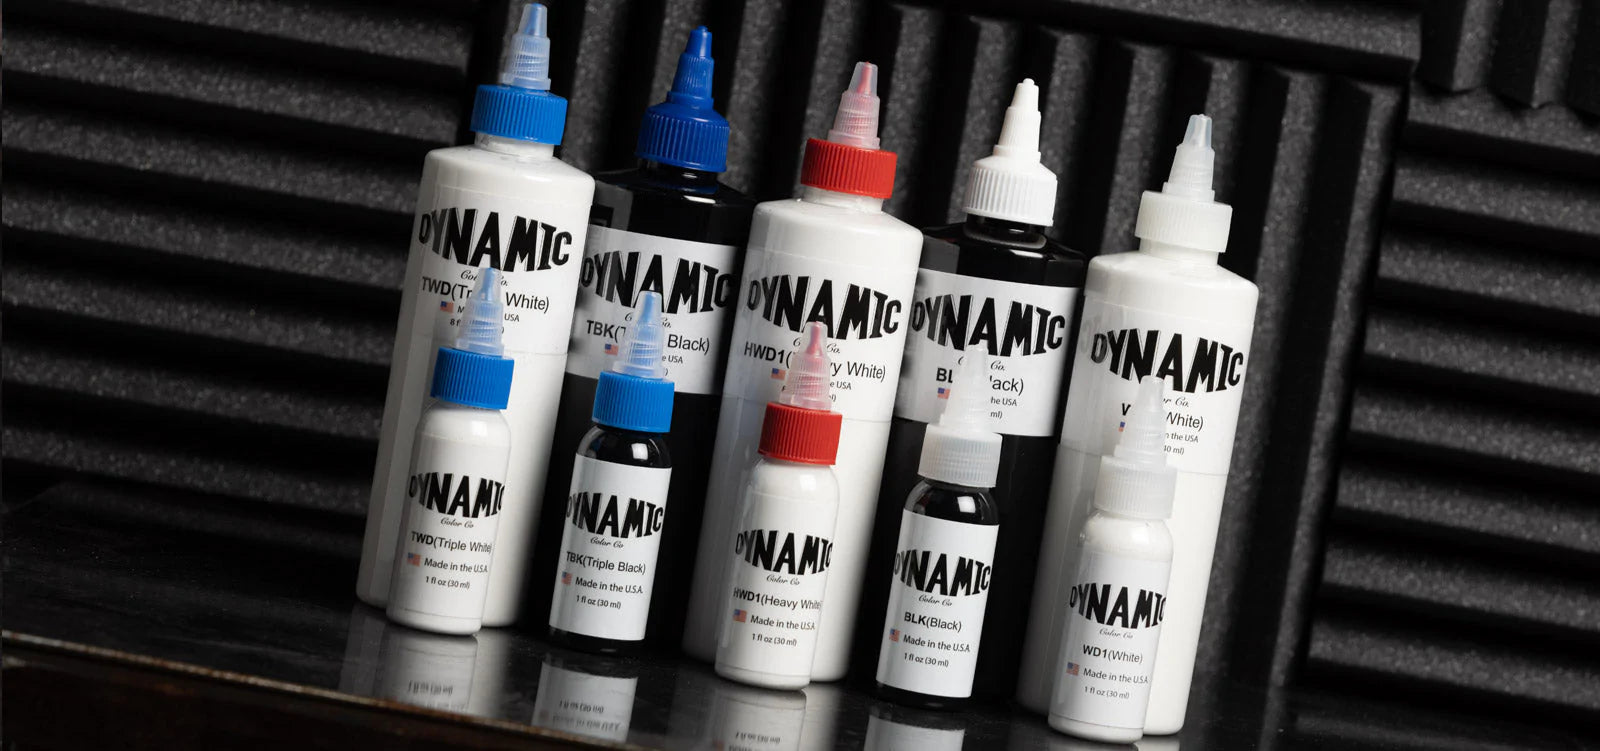 DYNAMIC COLOR — Industry Tattoo Supply